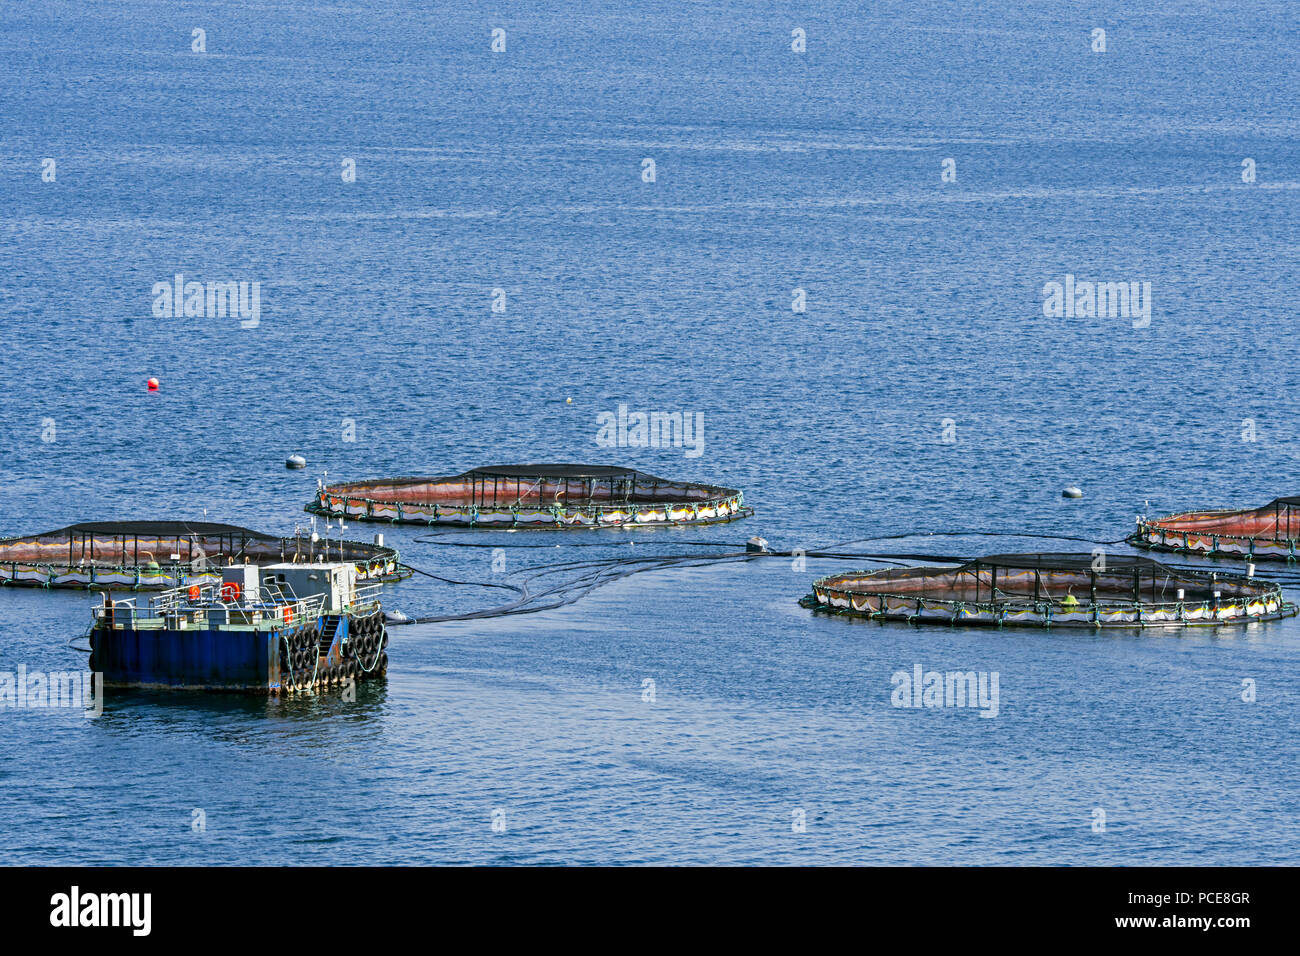 Aquaculture installation / sea cages / sea pens / fish cages at salmon farm in Laxo Voe, Vidlin on the Mainland, Shetland Islands, Scotland, UK Stock Photo